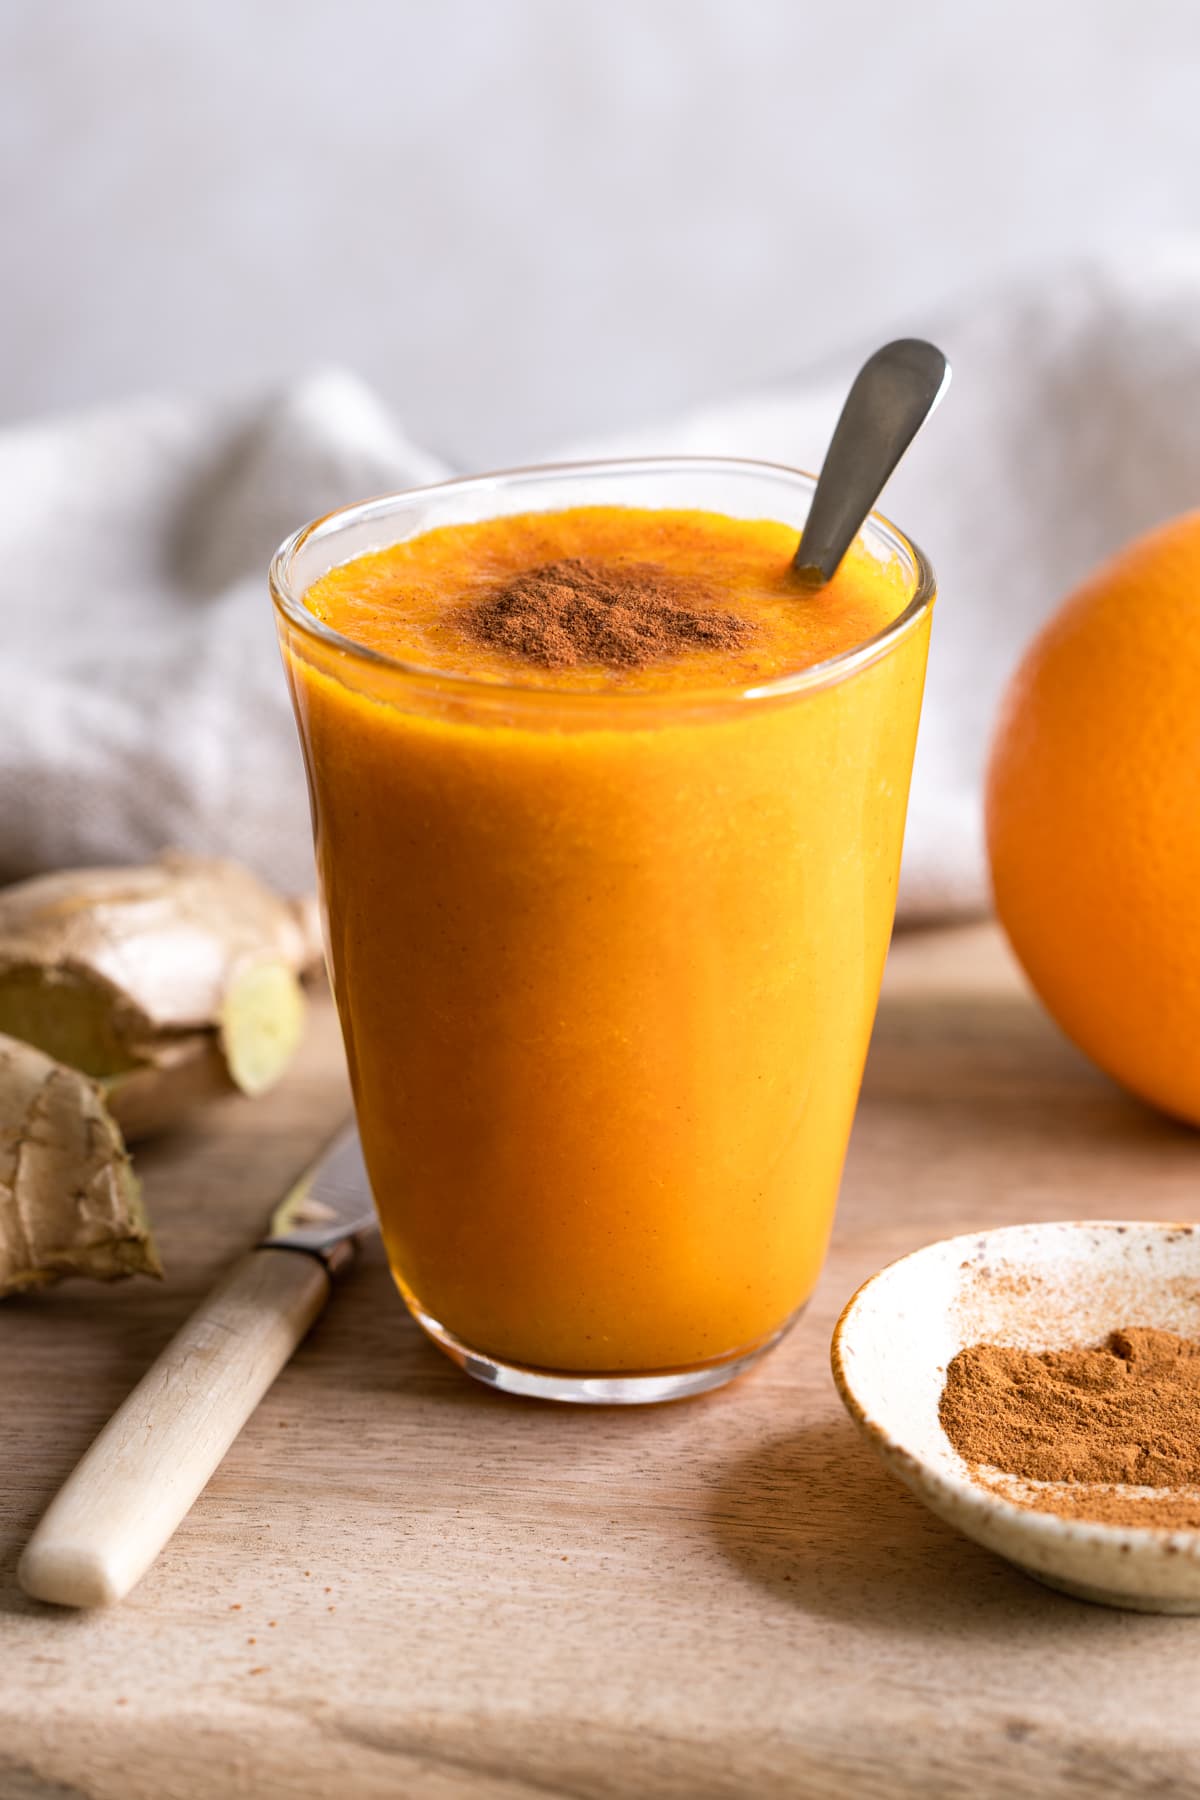 Orange Ginger Carrot Smoothie topped with cinnamon powder